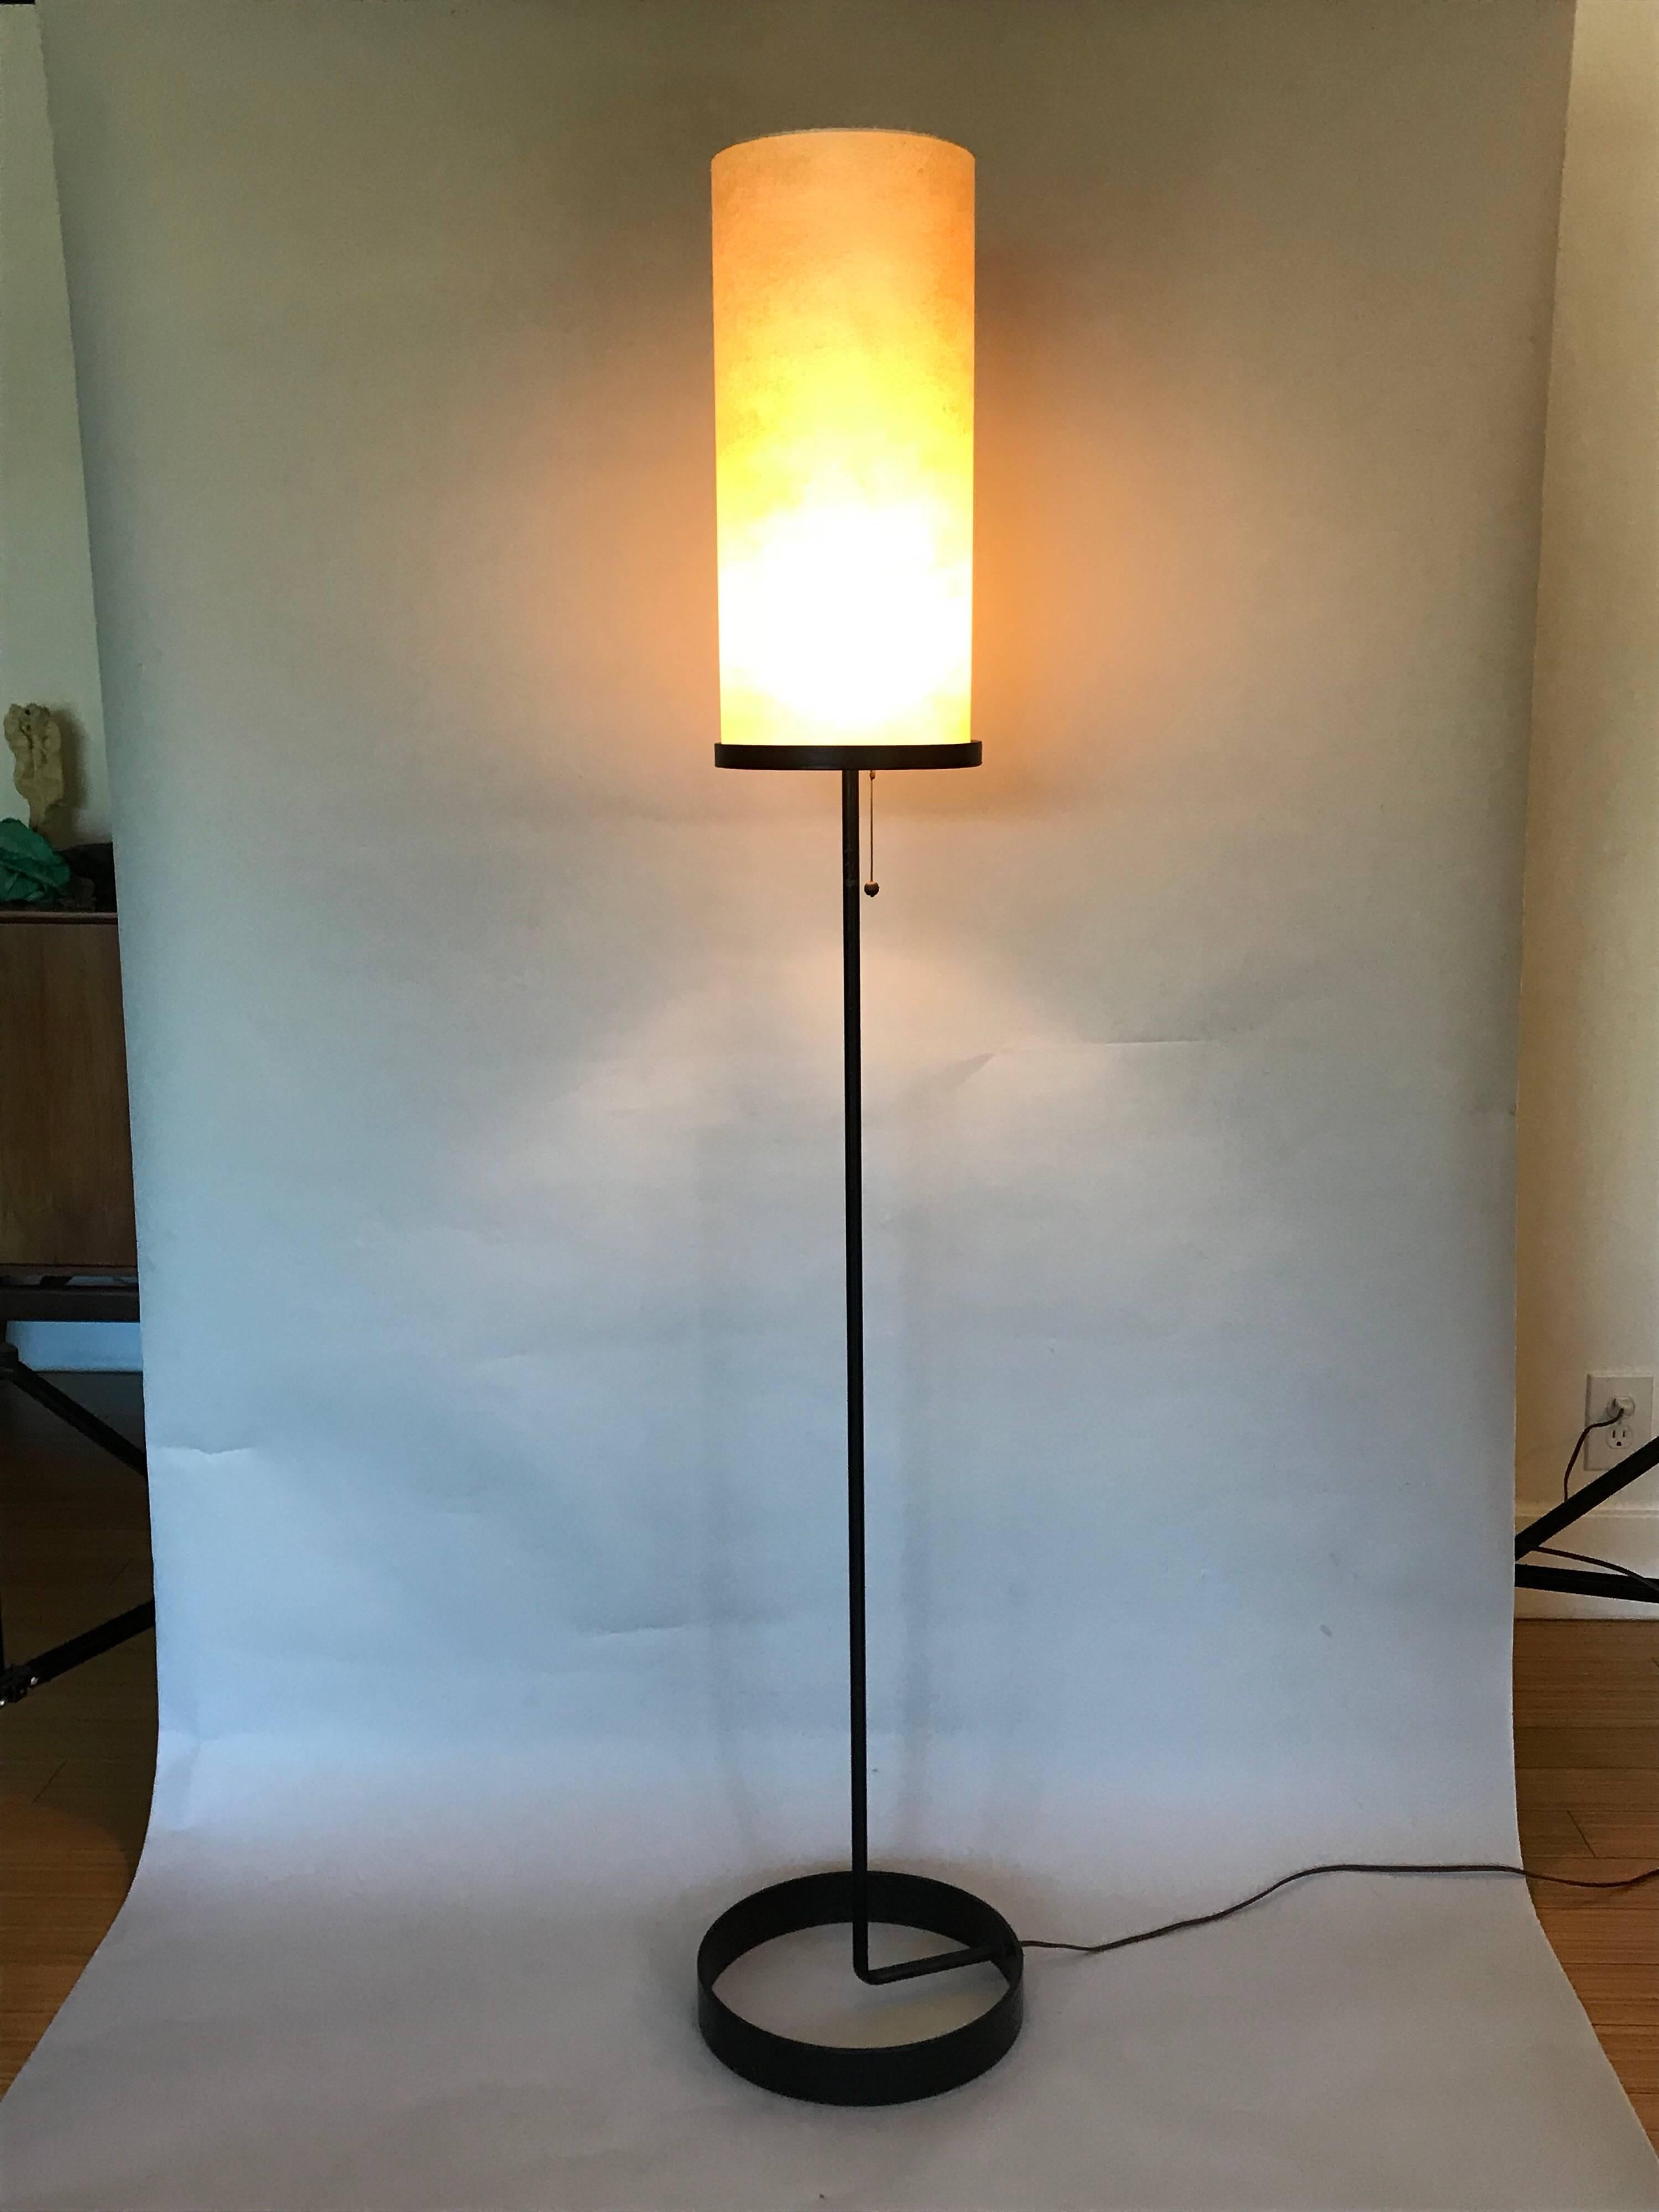 1918-1985,
A rare modernist design.
Made of iron with the original silk-paper shade and original hardware.
The shade shows minor wear with patina as well as the base.
No major damage, works great.
It's great as an accent for mood lighting and as an